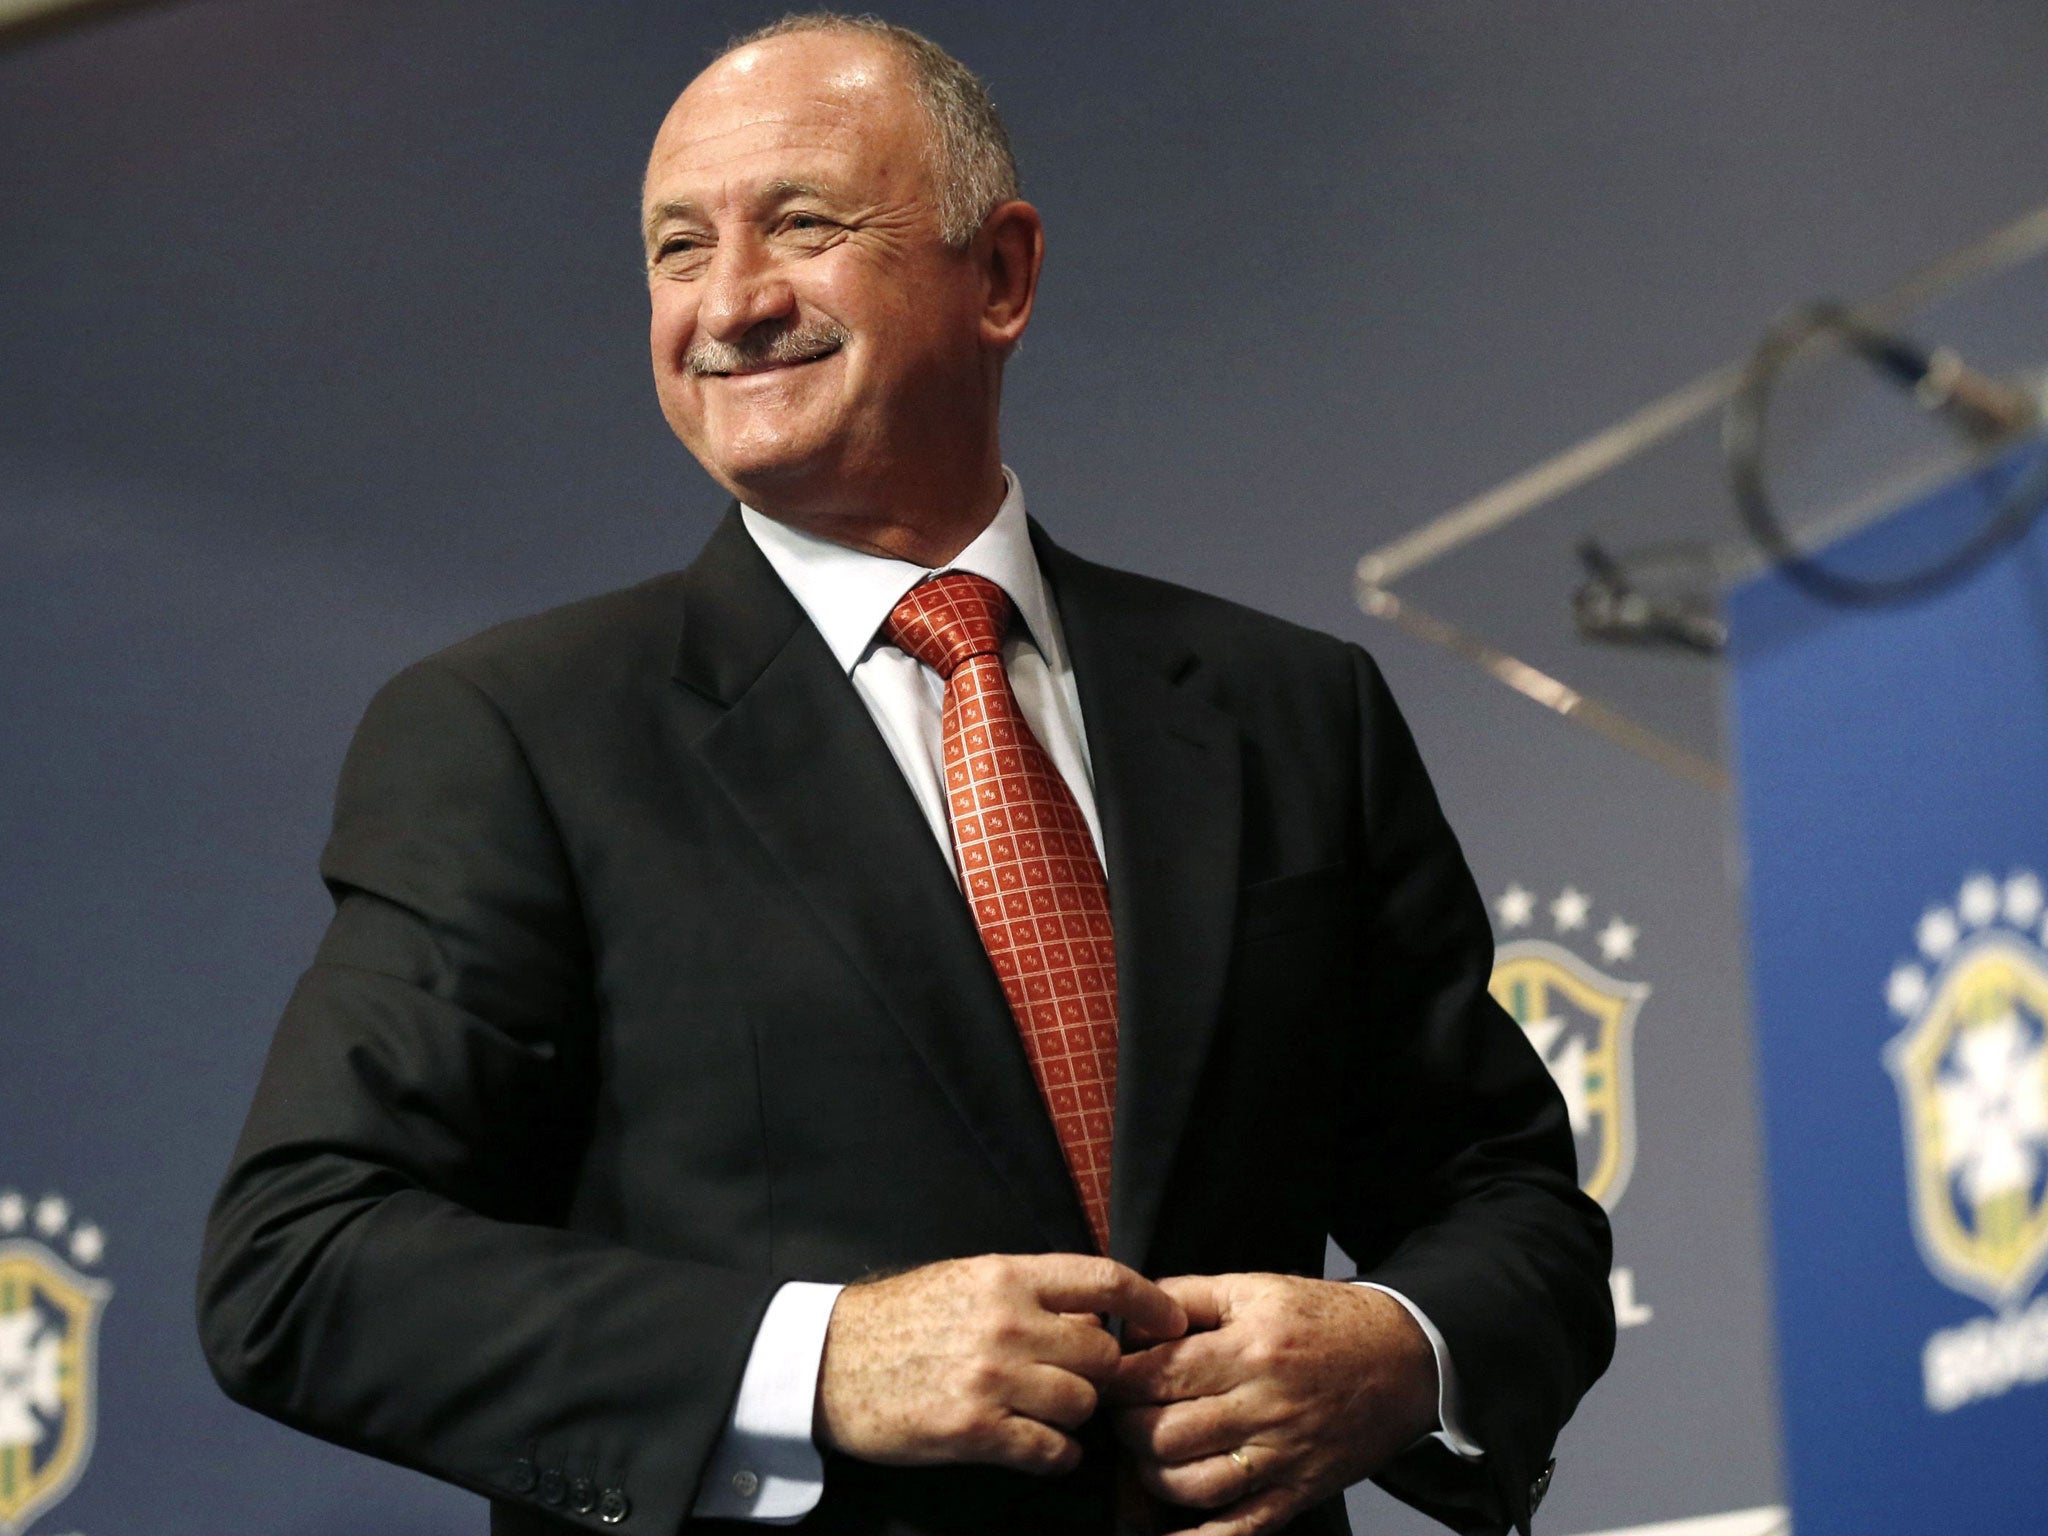 Home truths: Luiz Felipe Scolari is regarded as a father figure in Brazil with his natural charisma and humour